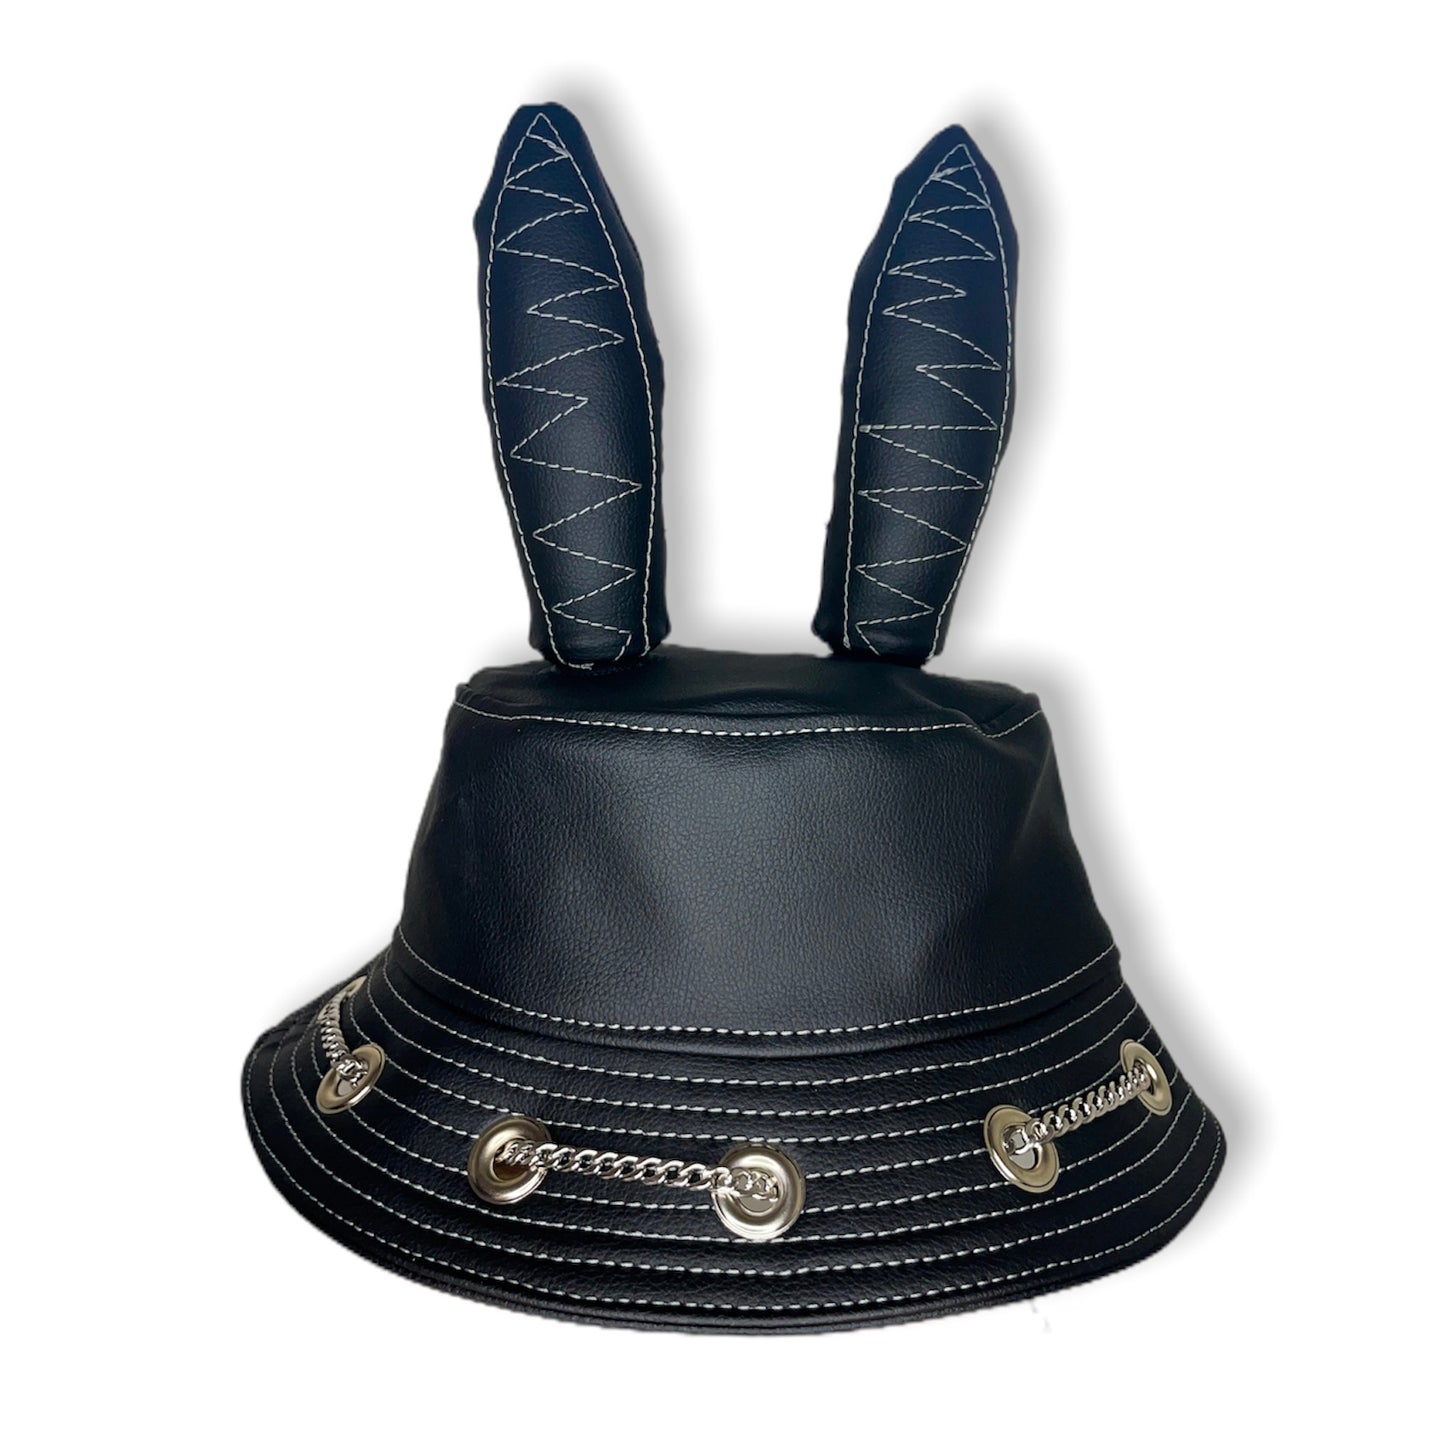 Cactus Leather Bunny Hat Grey 1of1